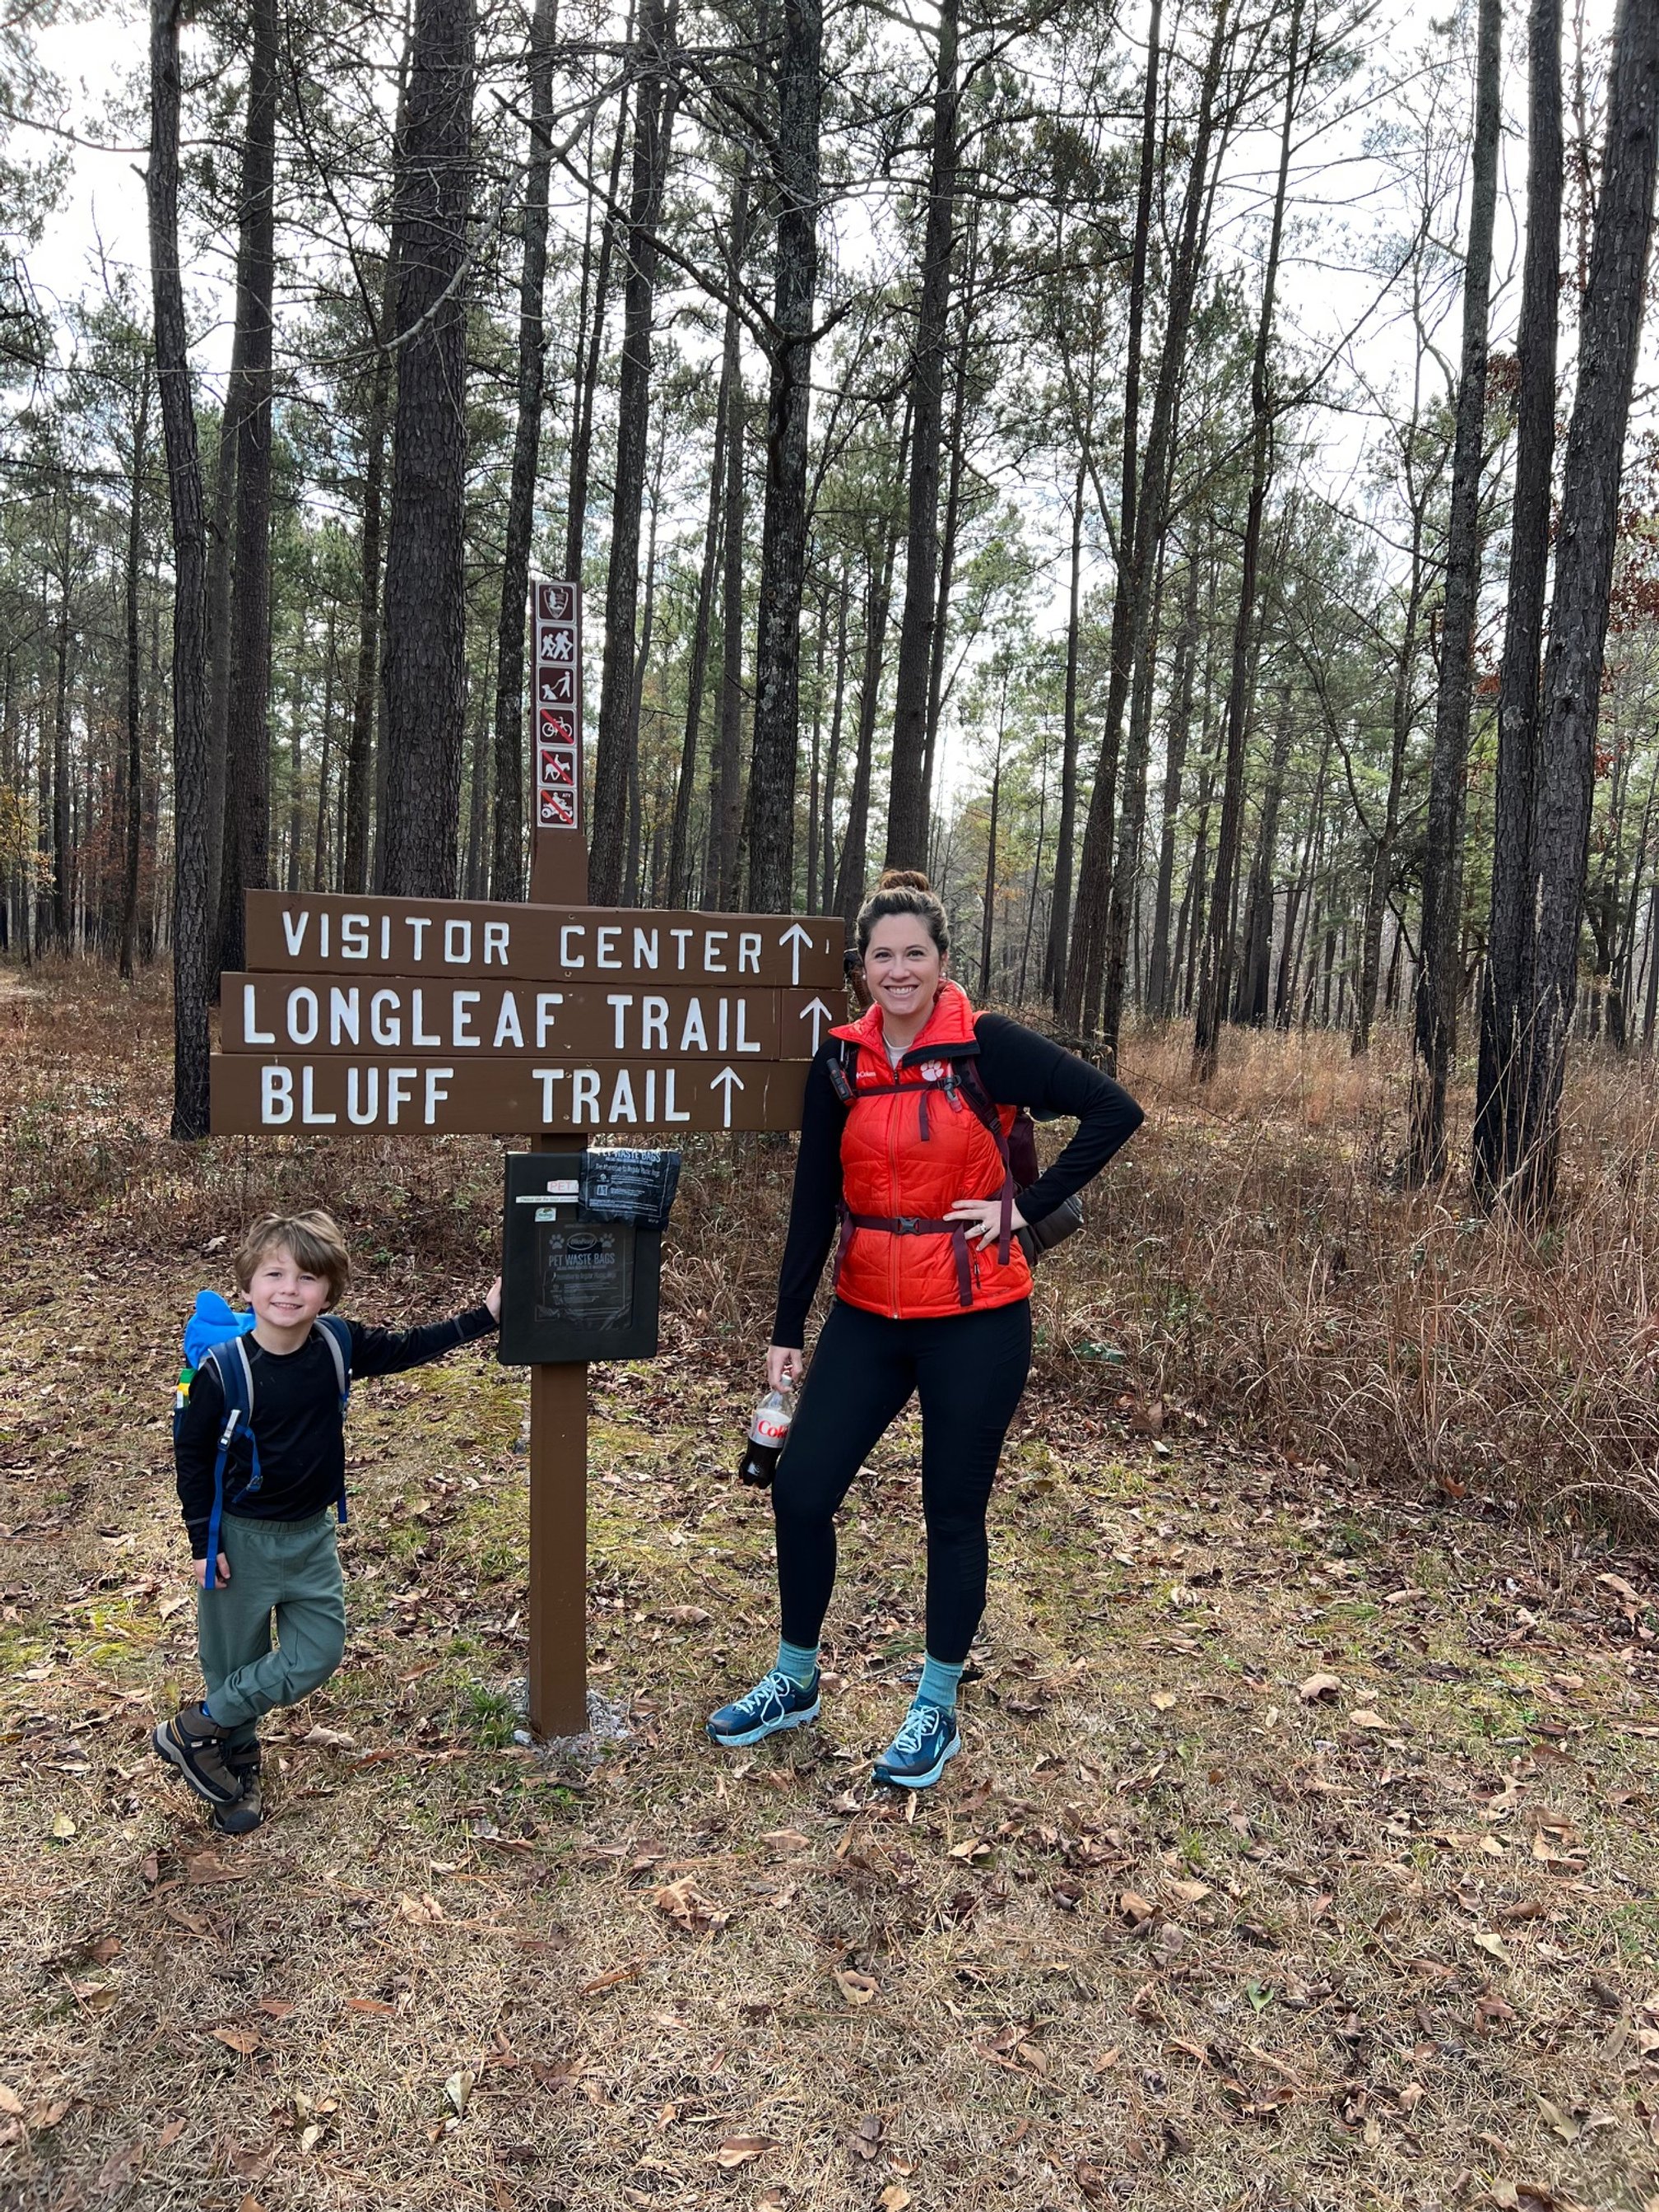 is-congaree-national-park-worth-visiting-longleaf-bluff-trail-sign.jpg